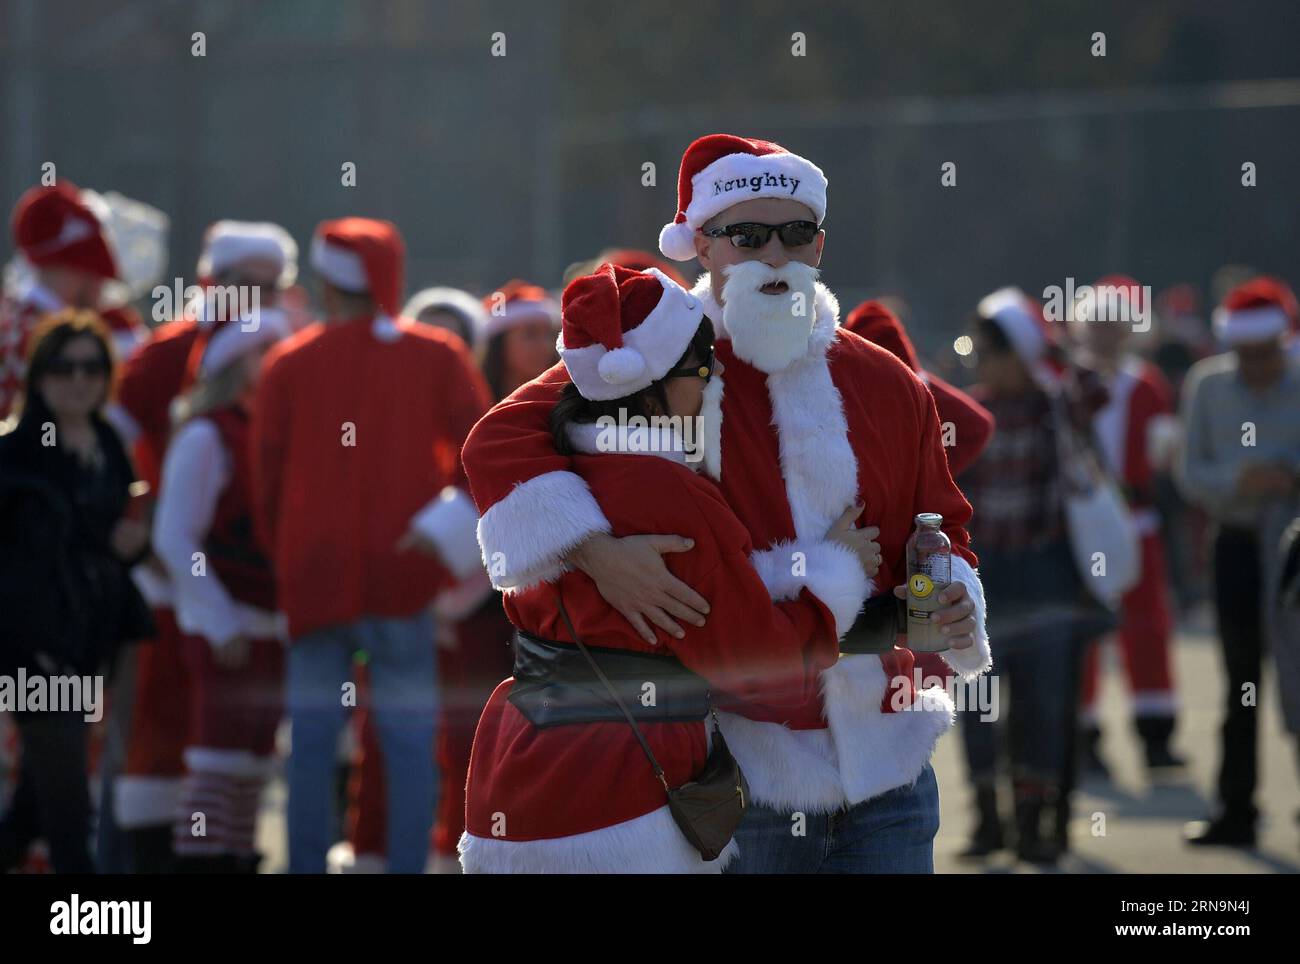 (151212) -- NEW YORK, Dec. 12, 2015 -- People dressed as Santa Claus take part in SantaCon 2015 in New York, the United States, on Dec. 12, 2015. SantaCon 2015 kicked off Saturday here in New York. SantaCon, a celebration that calls for attendees to dress as Santas and follow a pre-planned route of bar-hopping, is celebrated in cities across the U.S. and the world.) U.S.-NEW YORK-SANTACON 2015-CELEBRATION WangxLei PUBLICATIONxNOTxINxCHN   151212 New York DEC 12 2015 Celebrities Dressed As Santa Claus Take Part in Santacon 2015 in New York The United States ON DEC 12 2015 Santacon 2015 kicked o Stock Photo